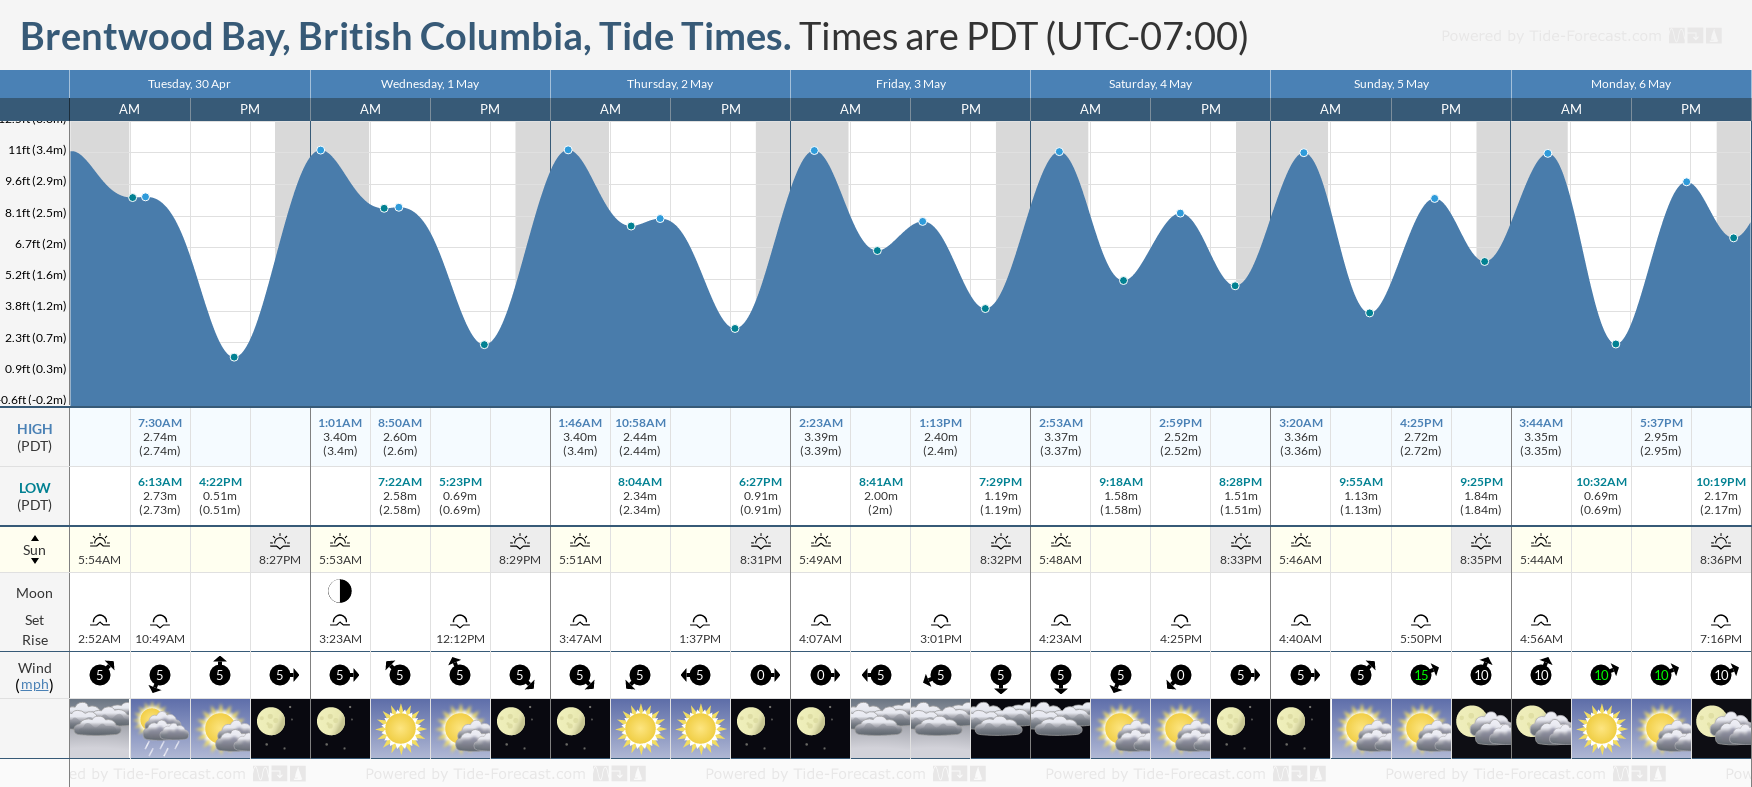 Brentwood Bay, British Columbia Tide Chart including high and low tide tide times for the next 7 days